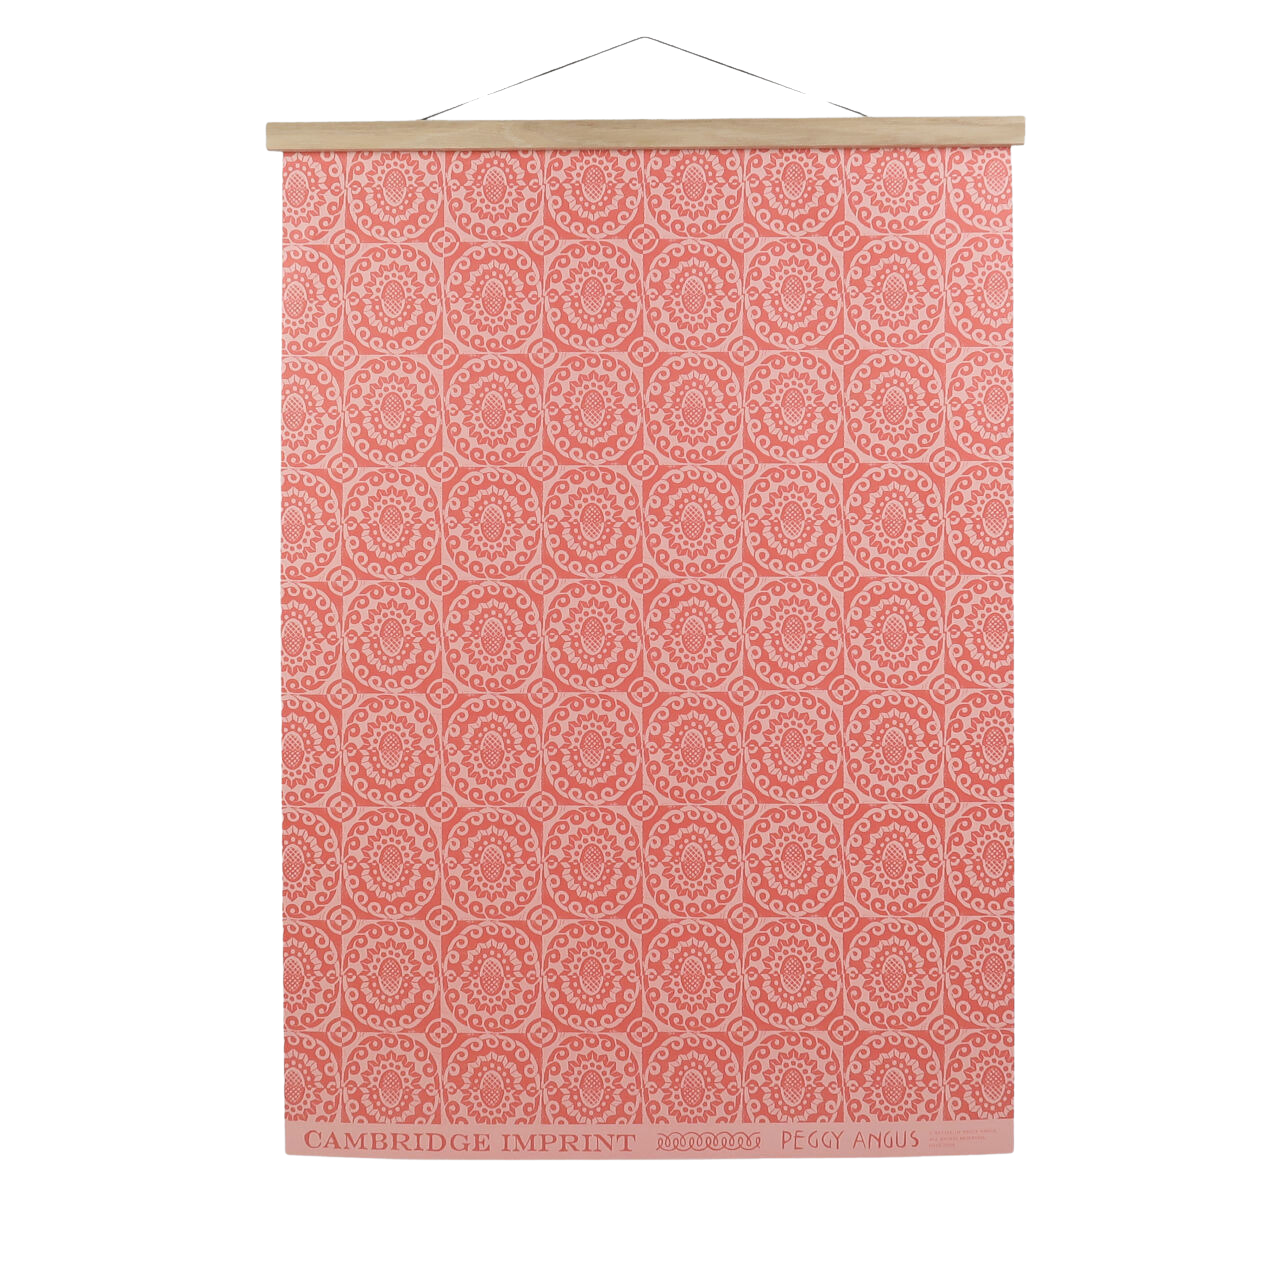 Cambridge Imprint Pineapple Giftwrap by Peggy Angus - 10 Sheets